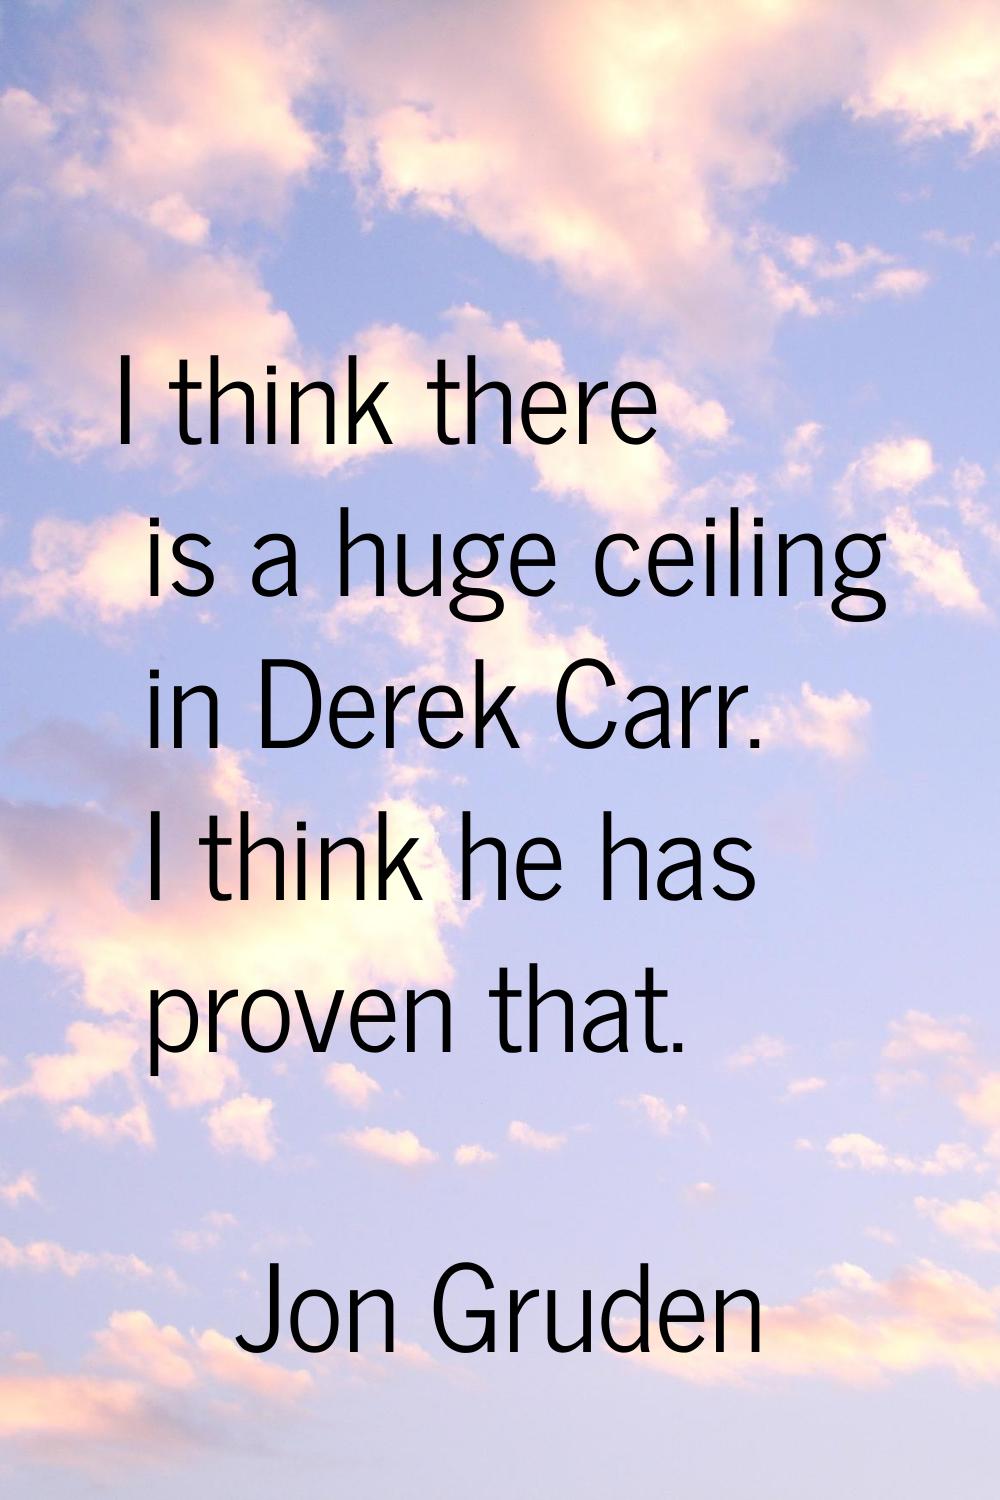 I think there is a huge ceiling in Derek Carr. I think he has proven that.